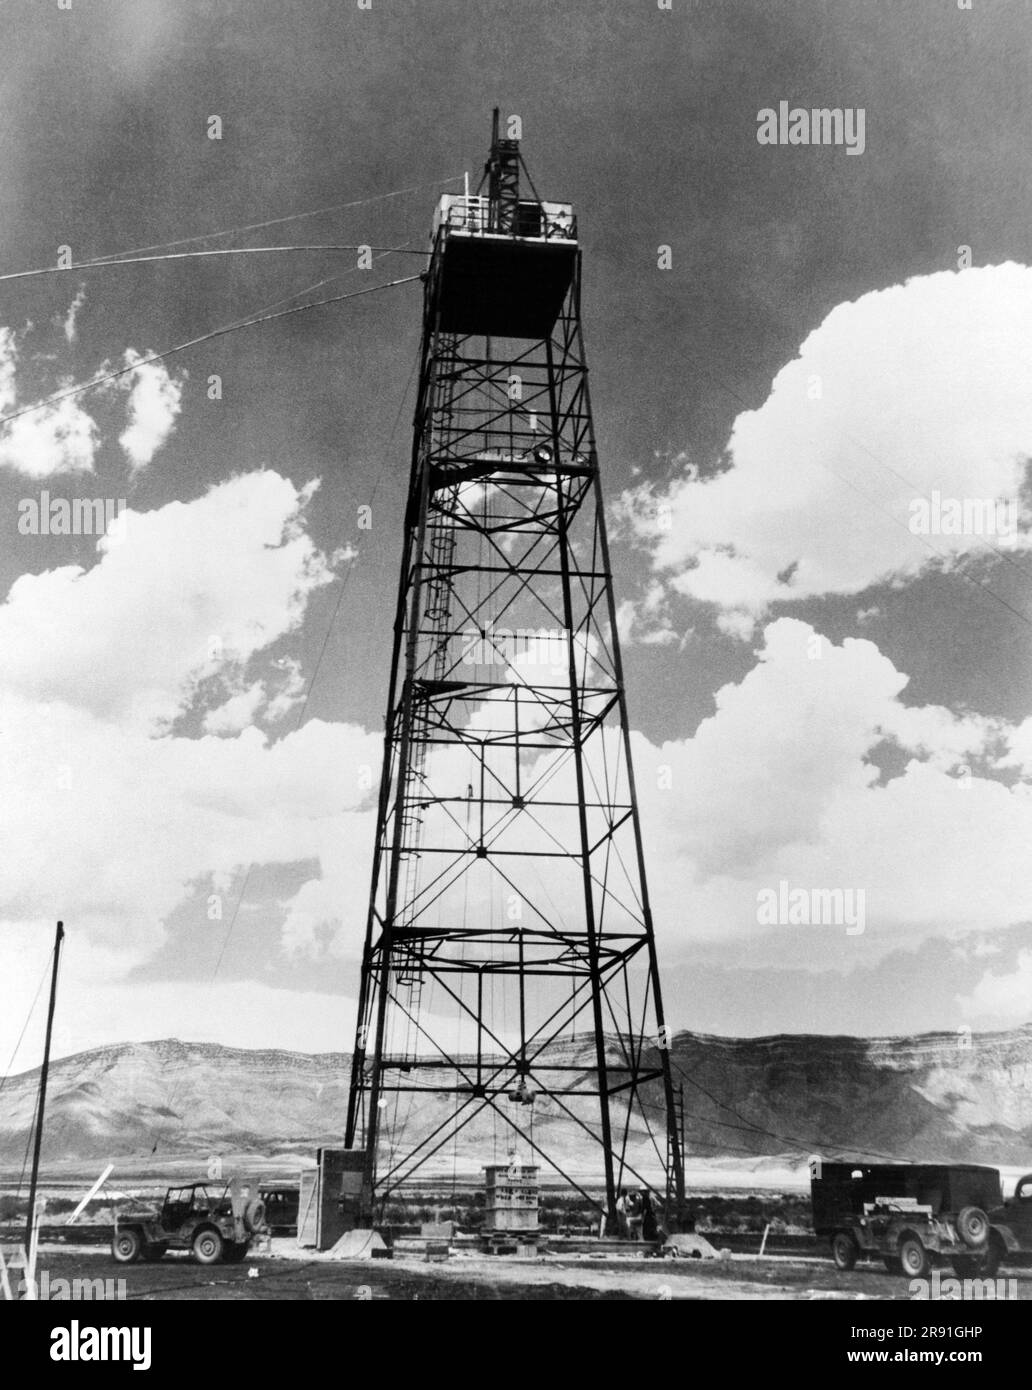 Los Alamos, New Mexico, July 16, 1945 The world's first atomic bomb was ...